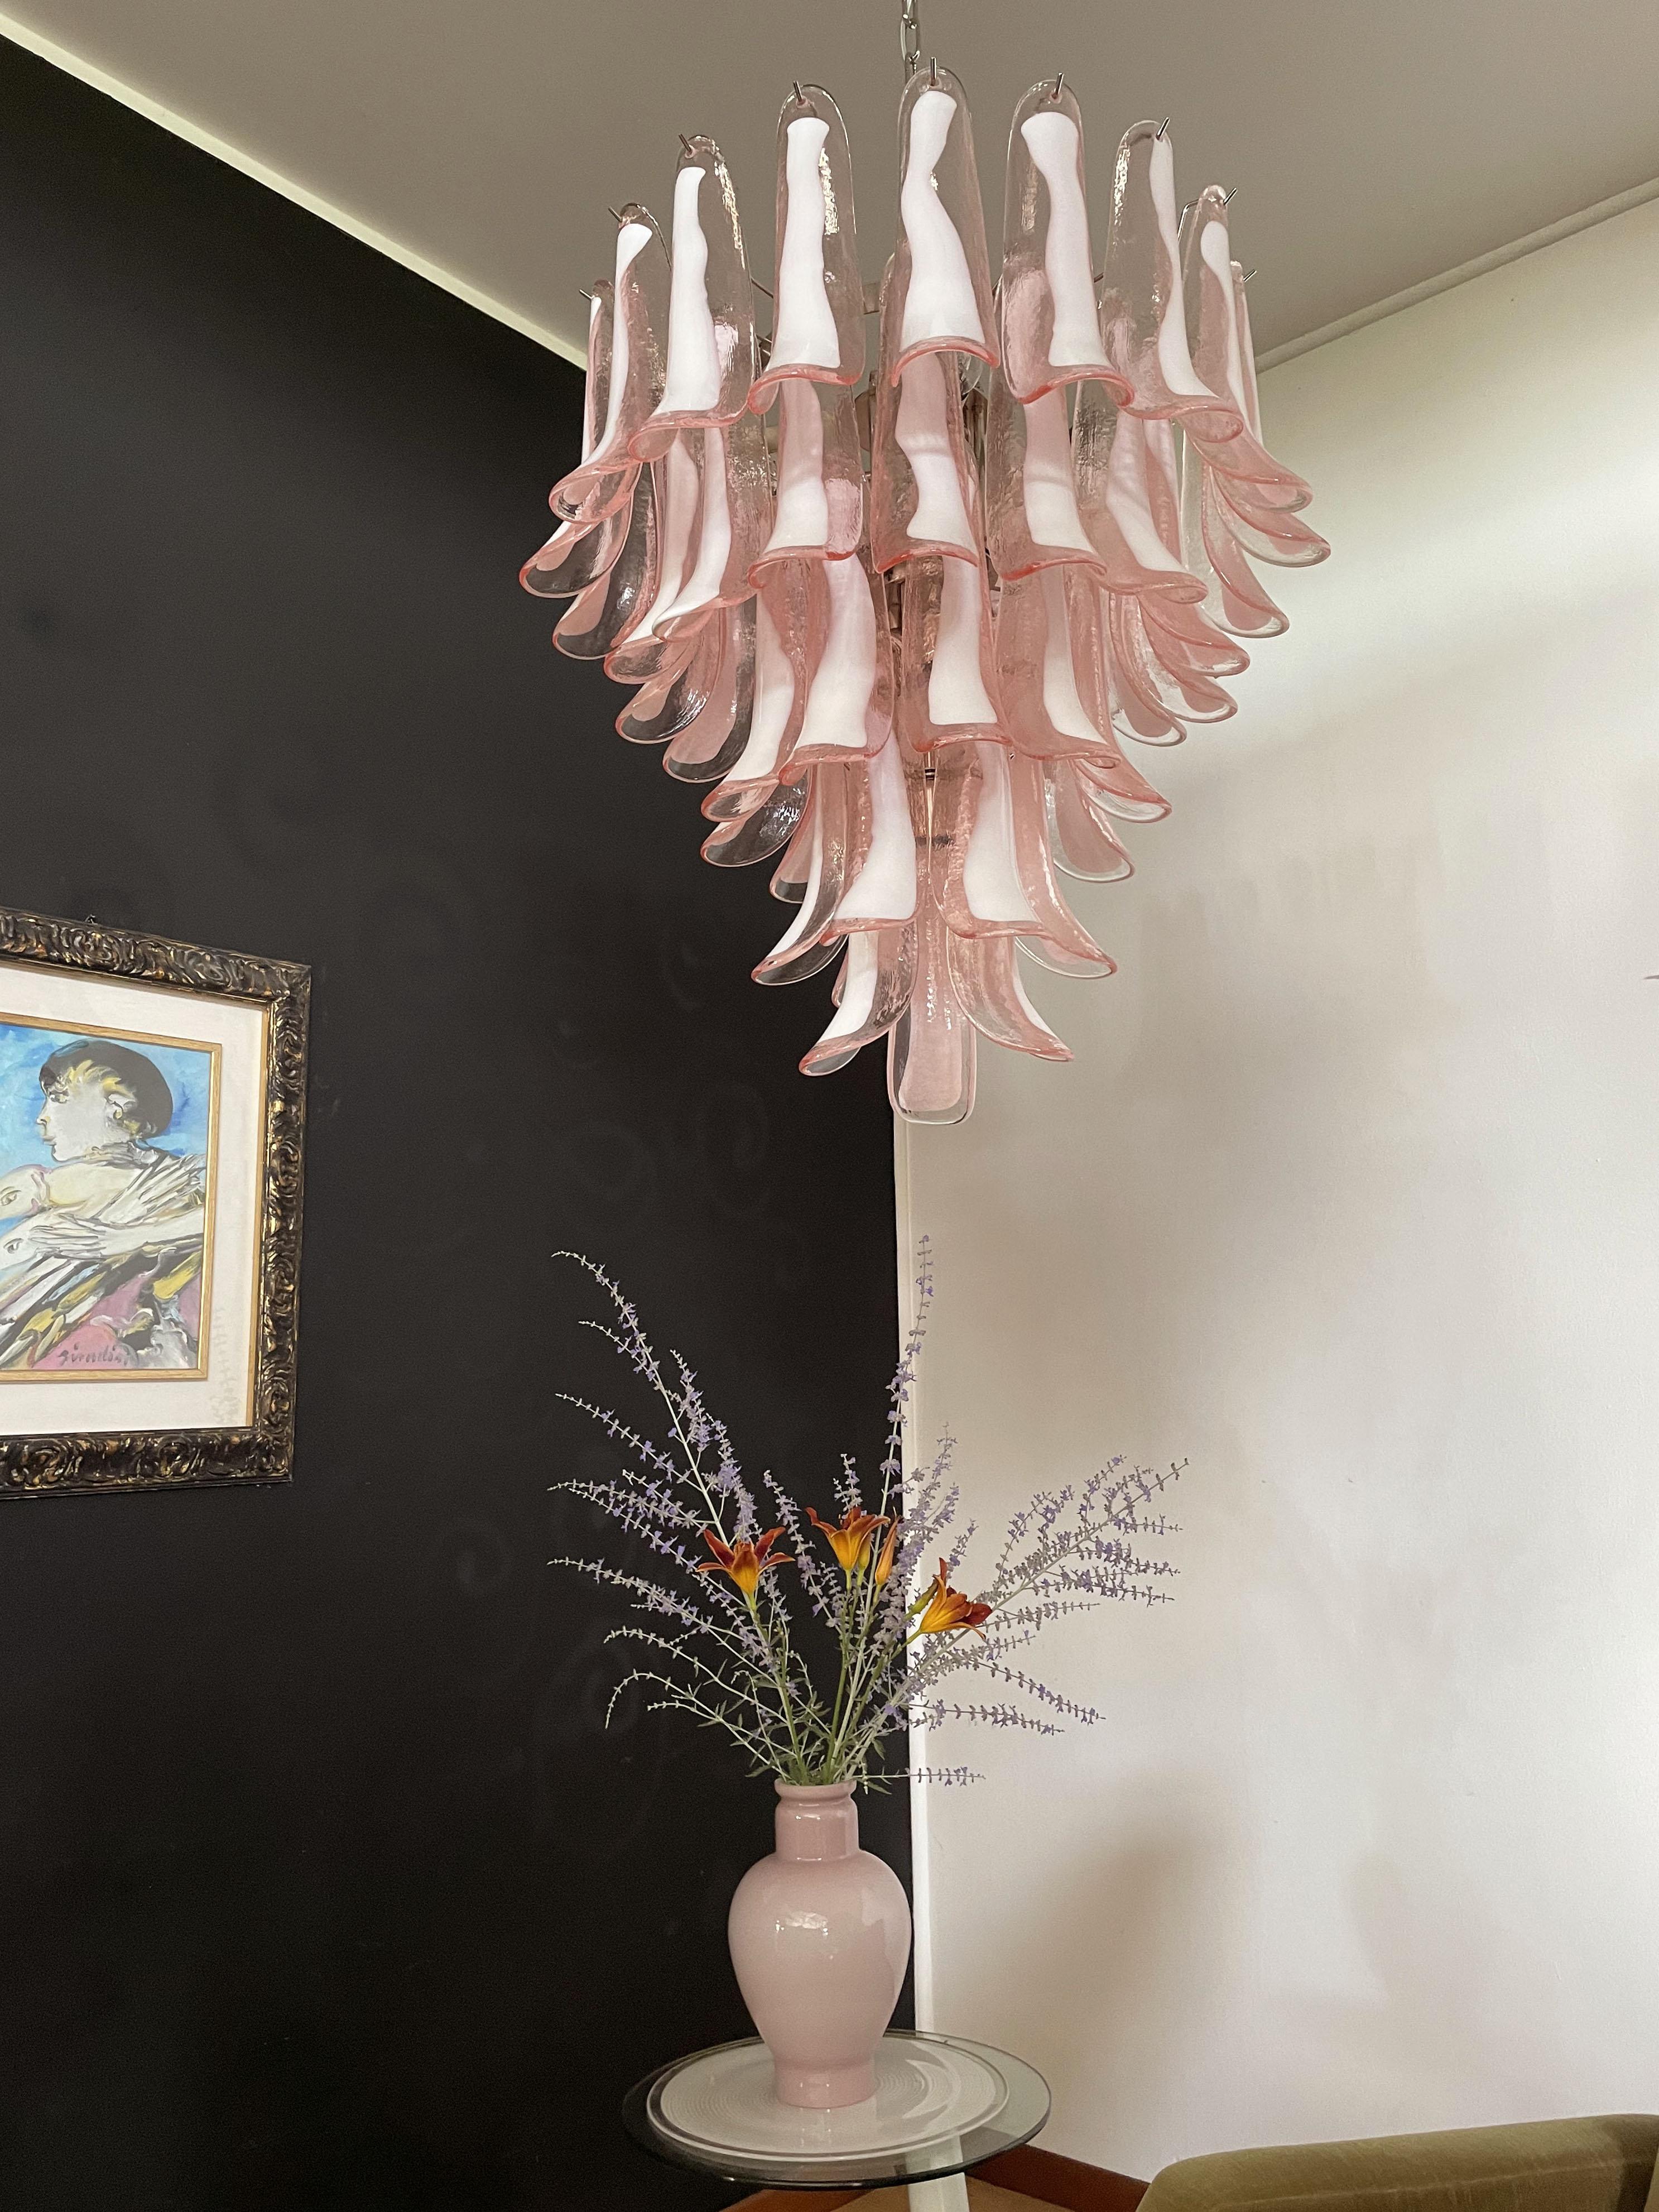 Huge Italian vintage Murano chandelier made by 52 glass petals (PINK and white “lattimo”) in a chrome frame.
Period: late 20th century
Dimensions: 55.10 inches (140 cm) height with chain, 29.50 inches (75 cm) height without chain, 26 inches (66 cm)